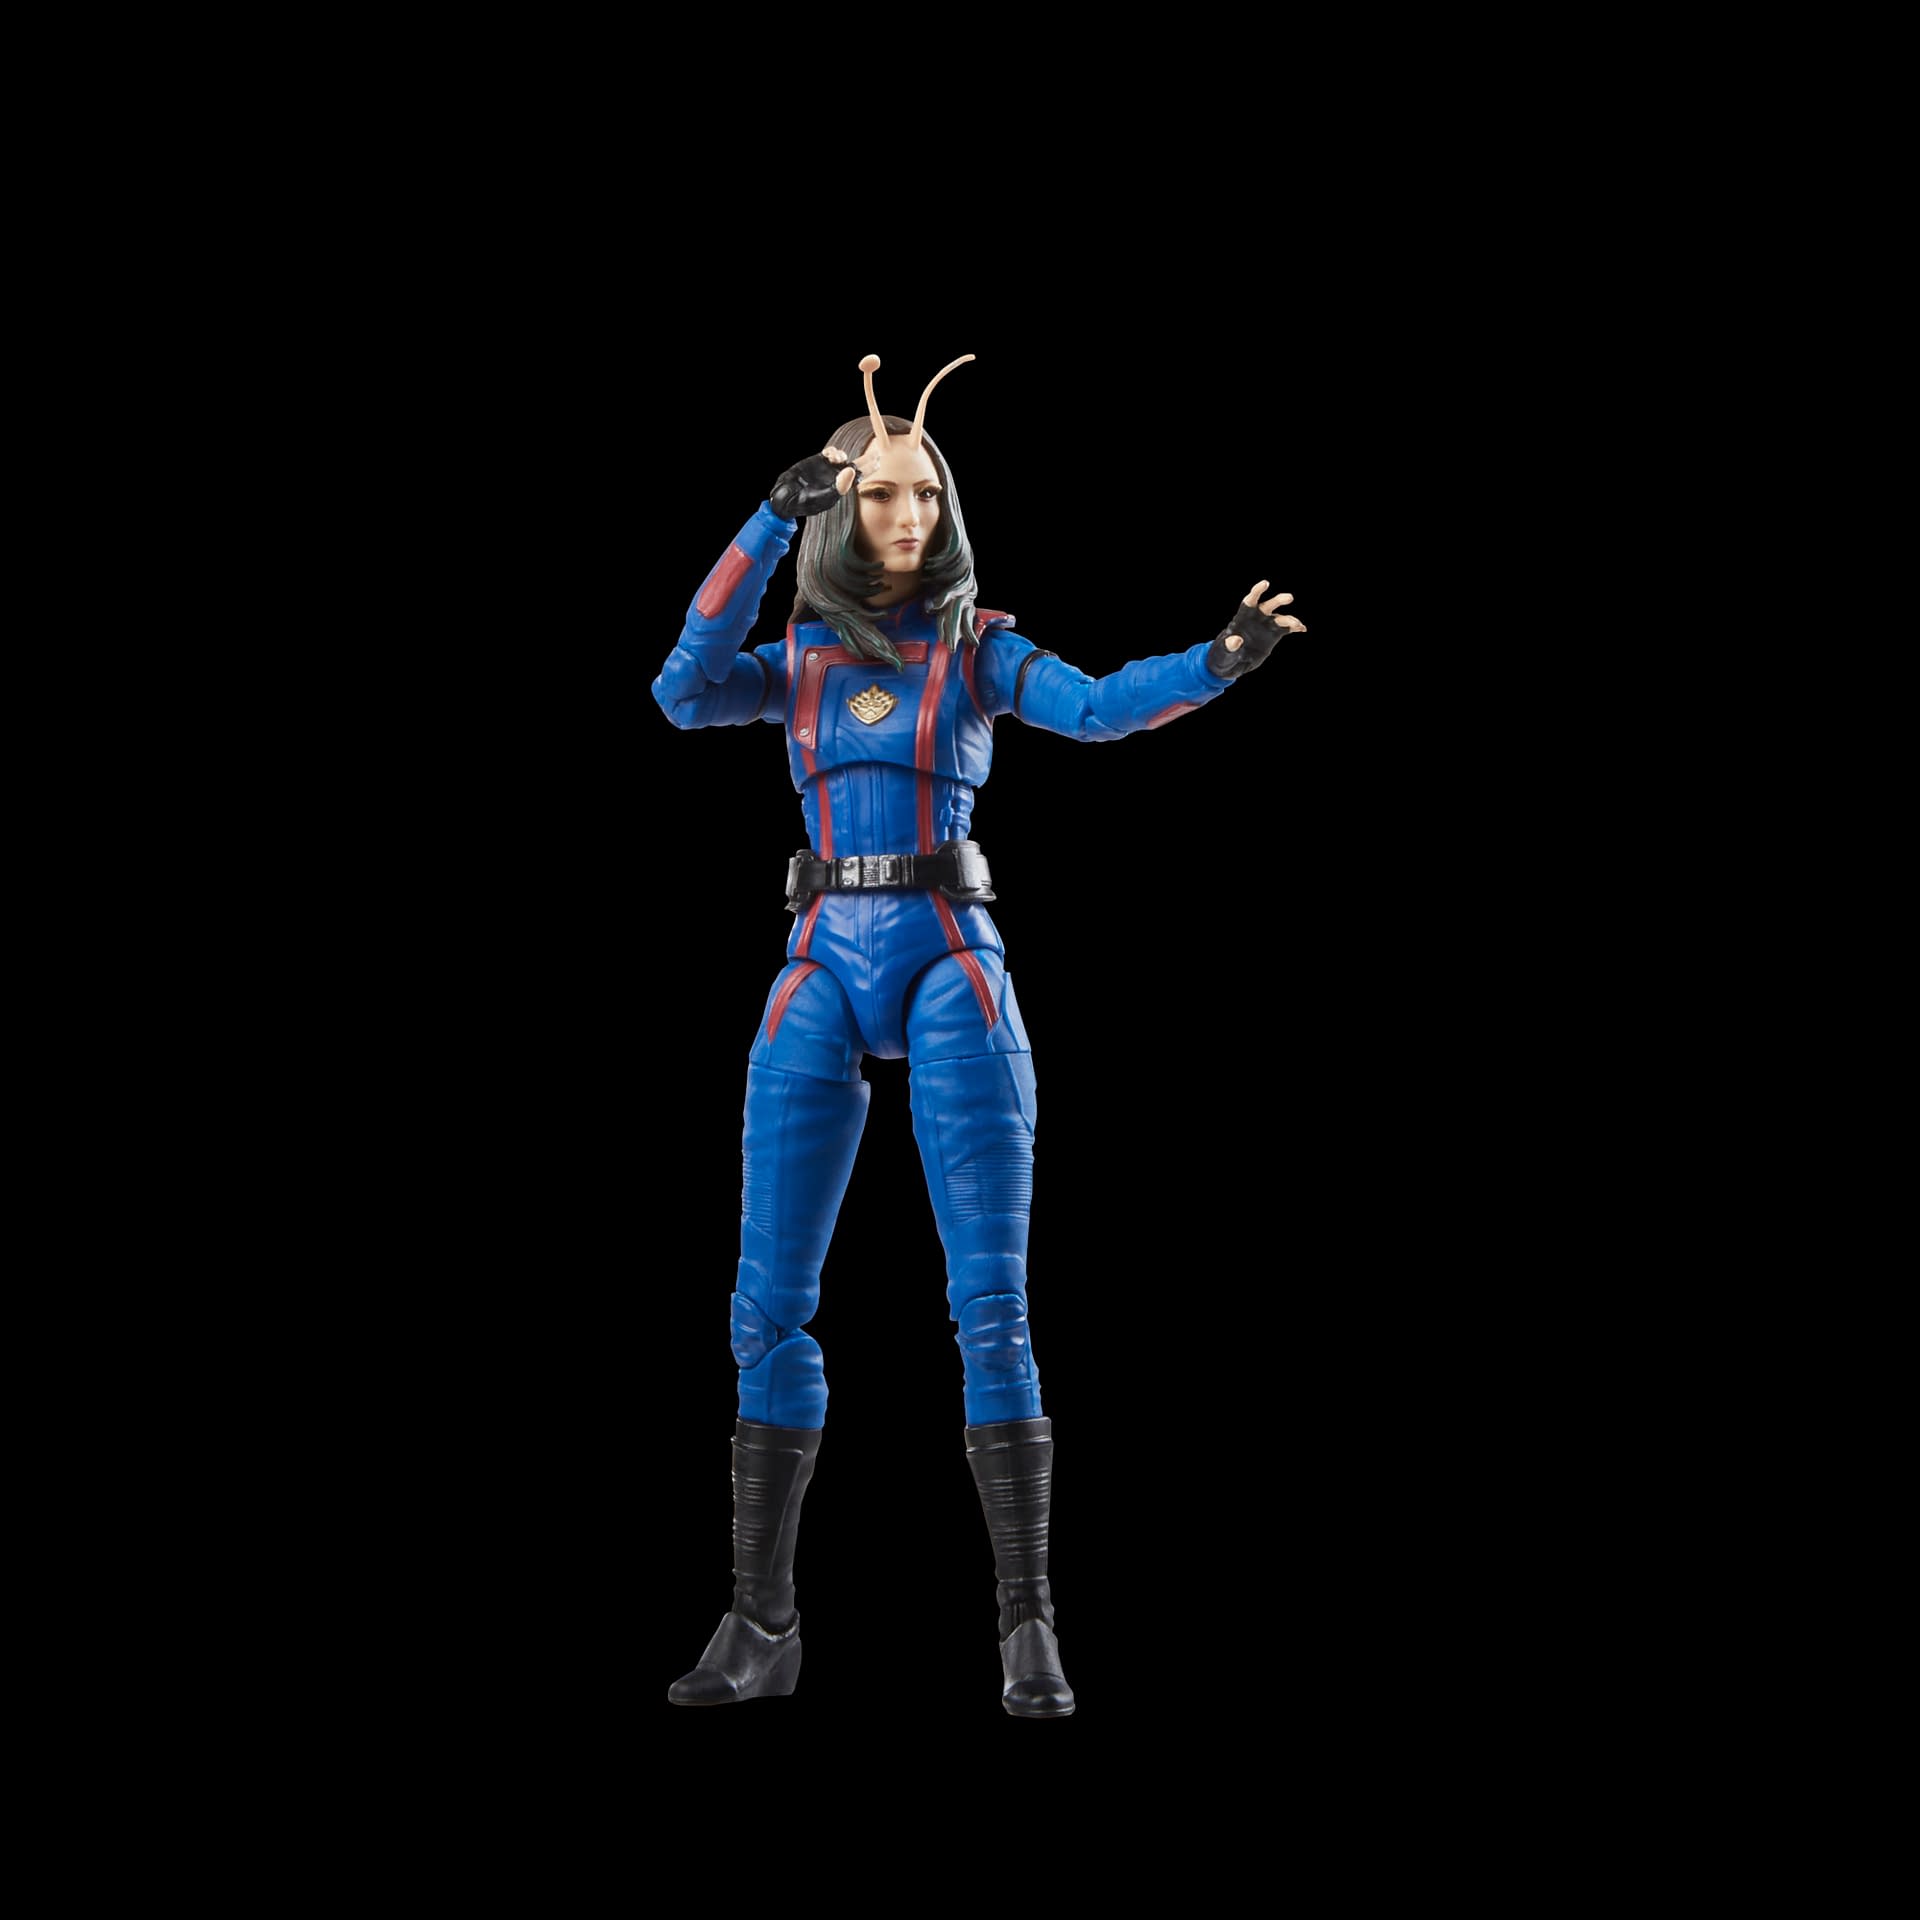 Guardians of the Galaxy Vol. 3 Mantis Figure Coming Soon from Hasbro 